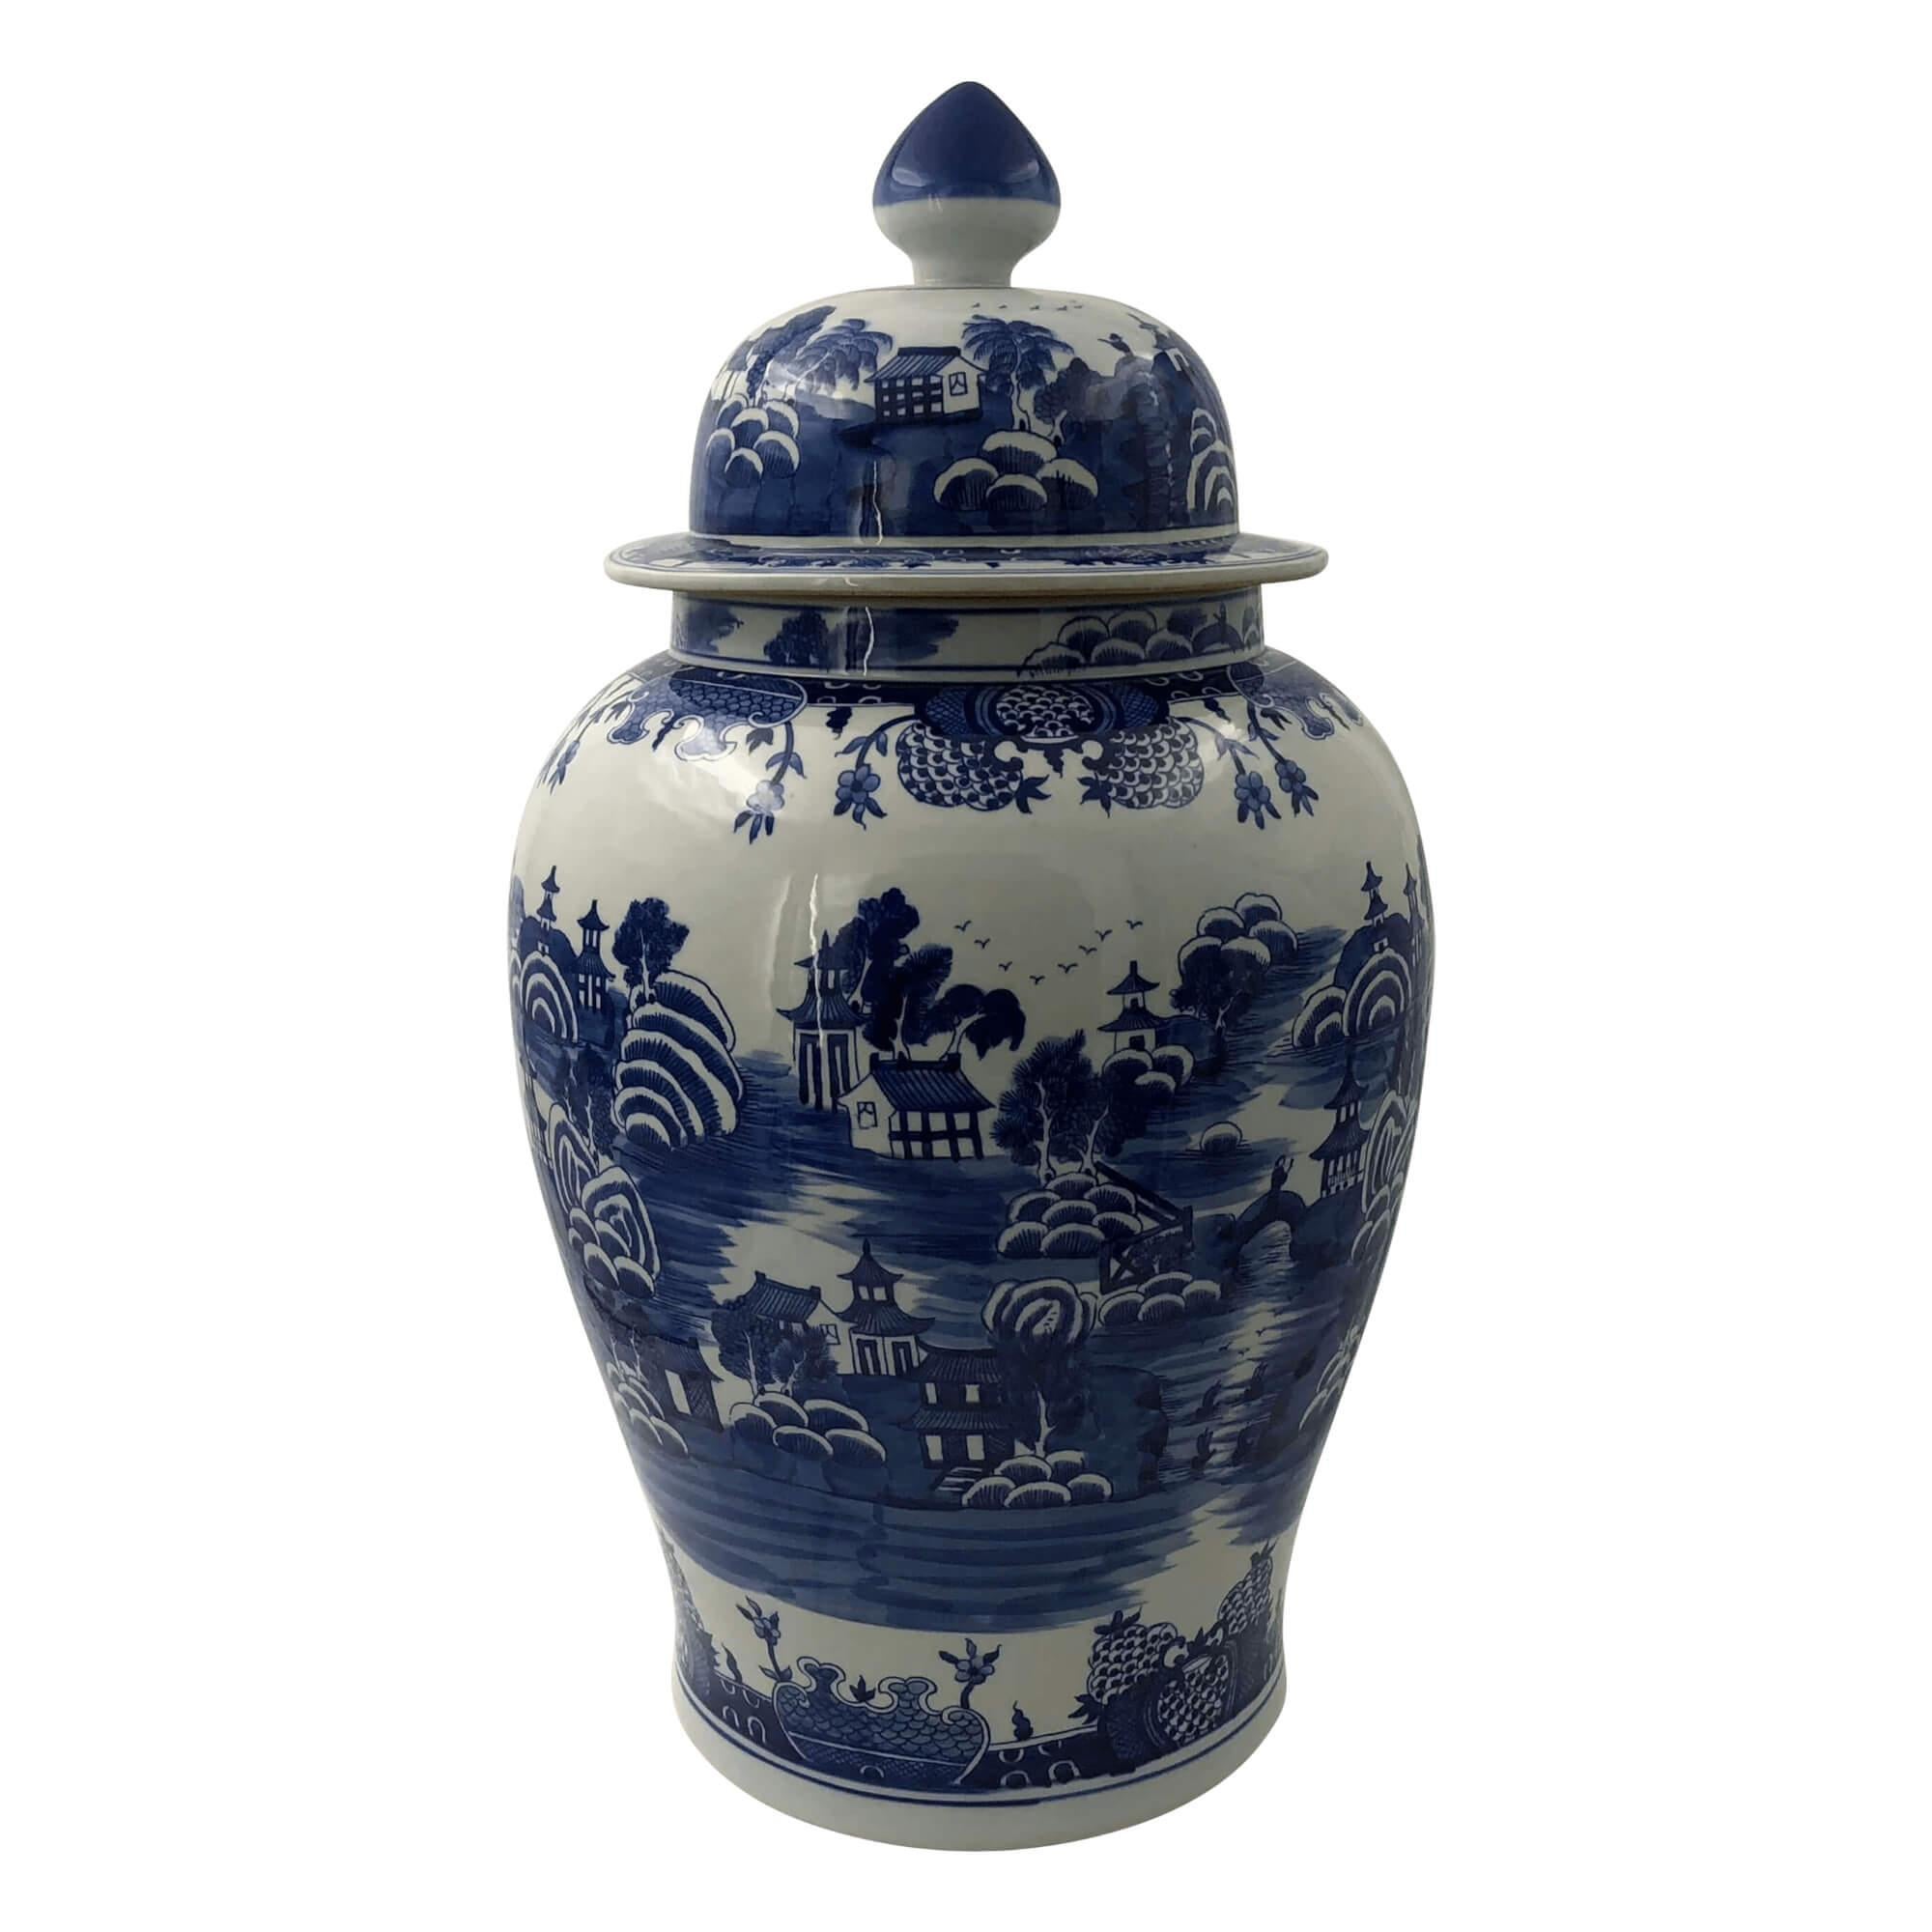 Chinese blue and white hand-painted ceramic lidded Ginger jars with Chinese garden pattern decoration.

Dimensions: 14.5